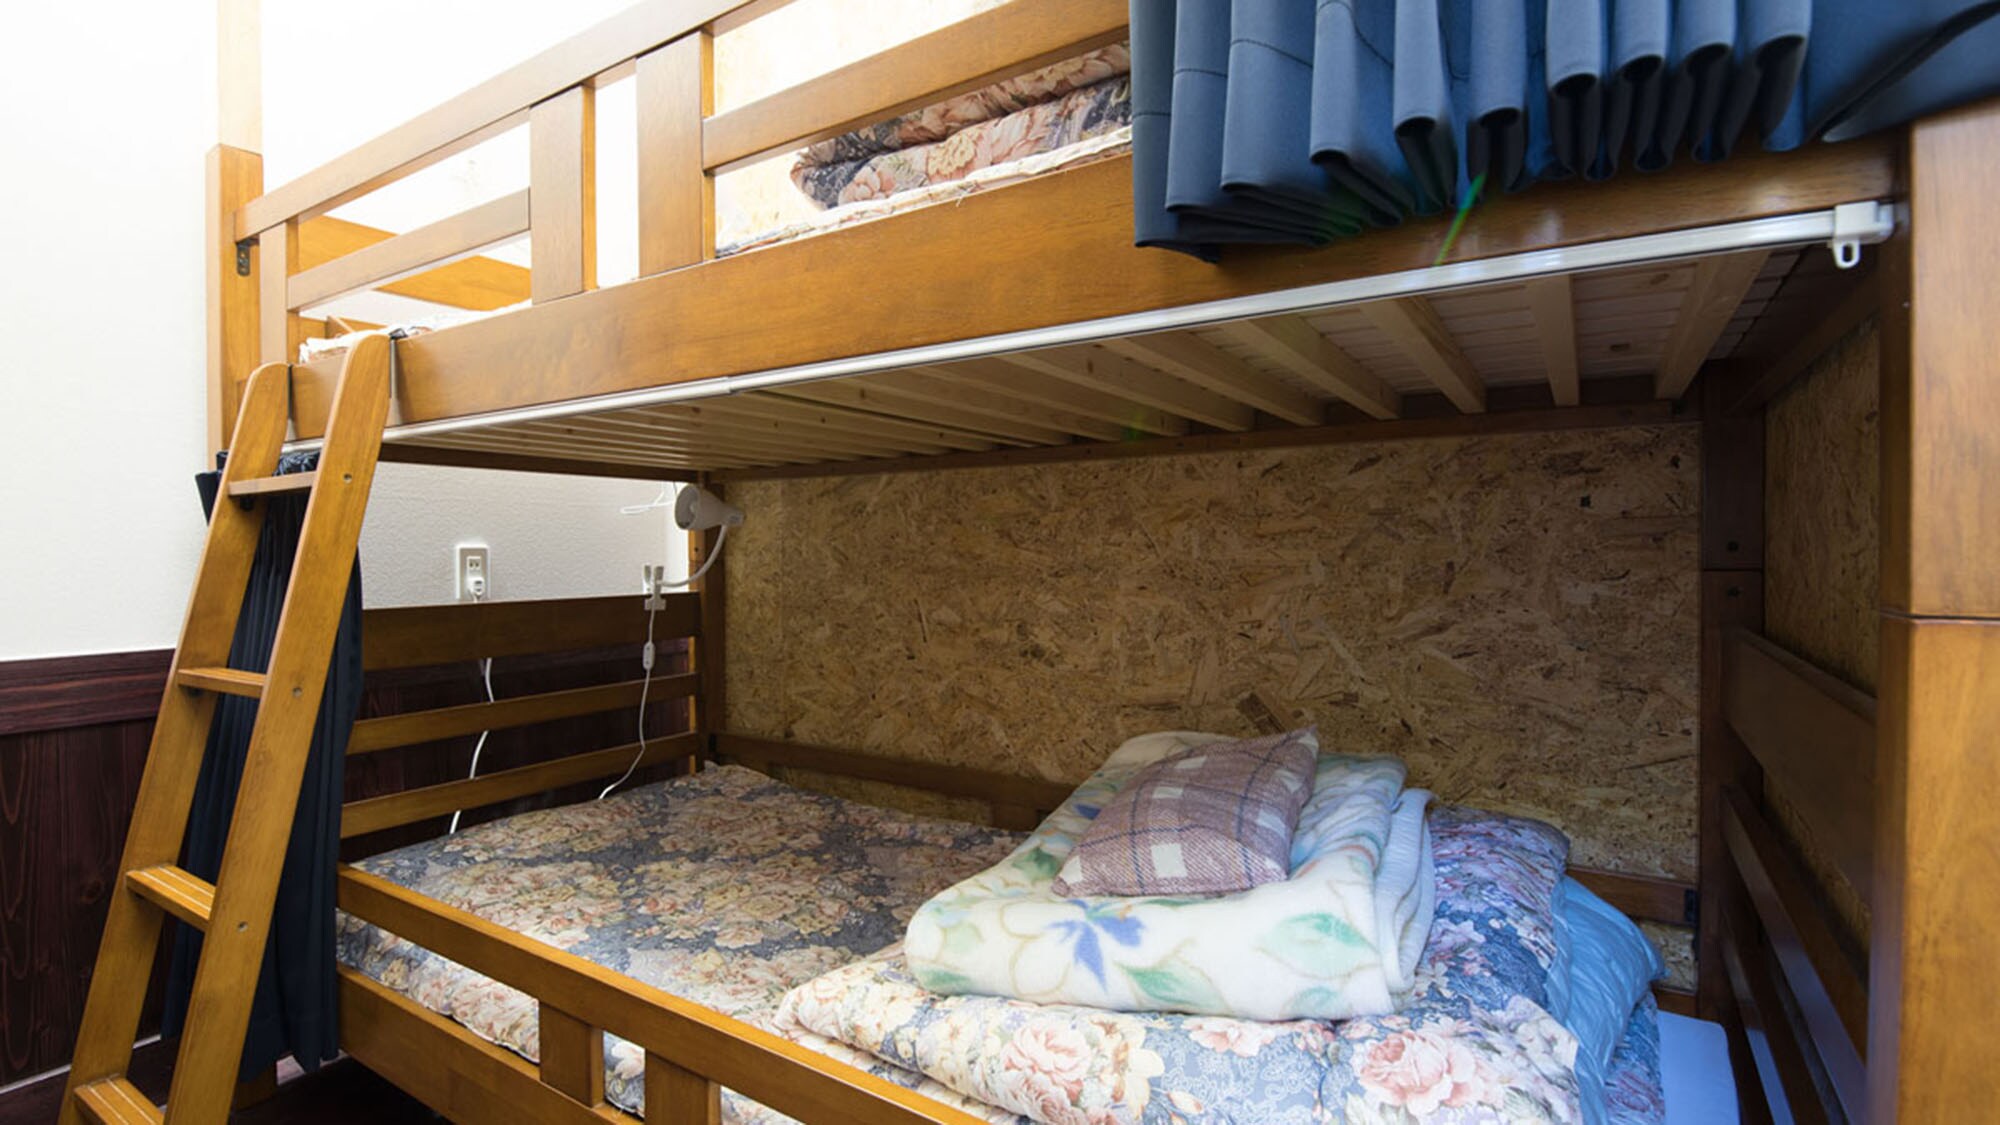 ・ Bunk beds with dormitory futons are available.